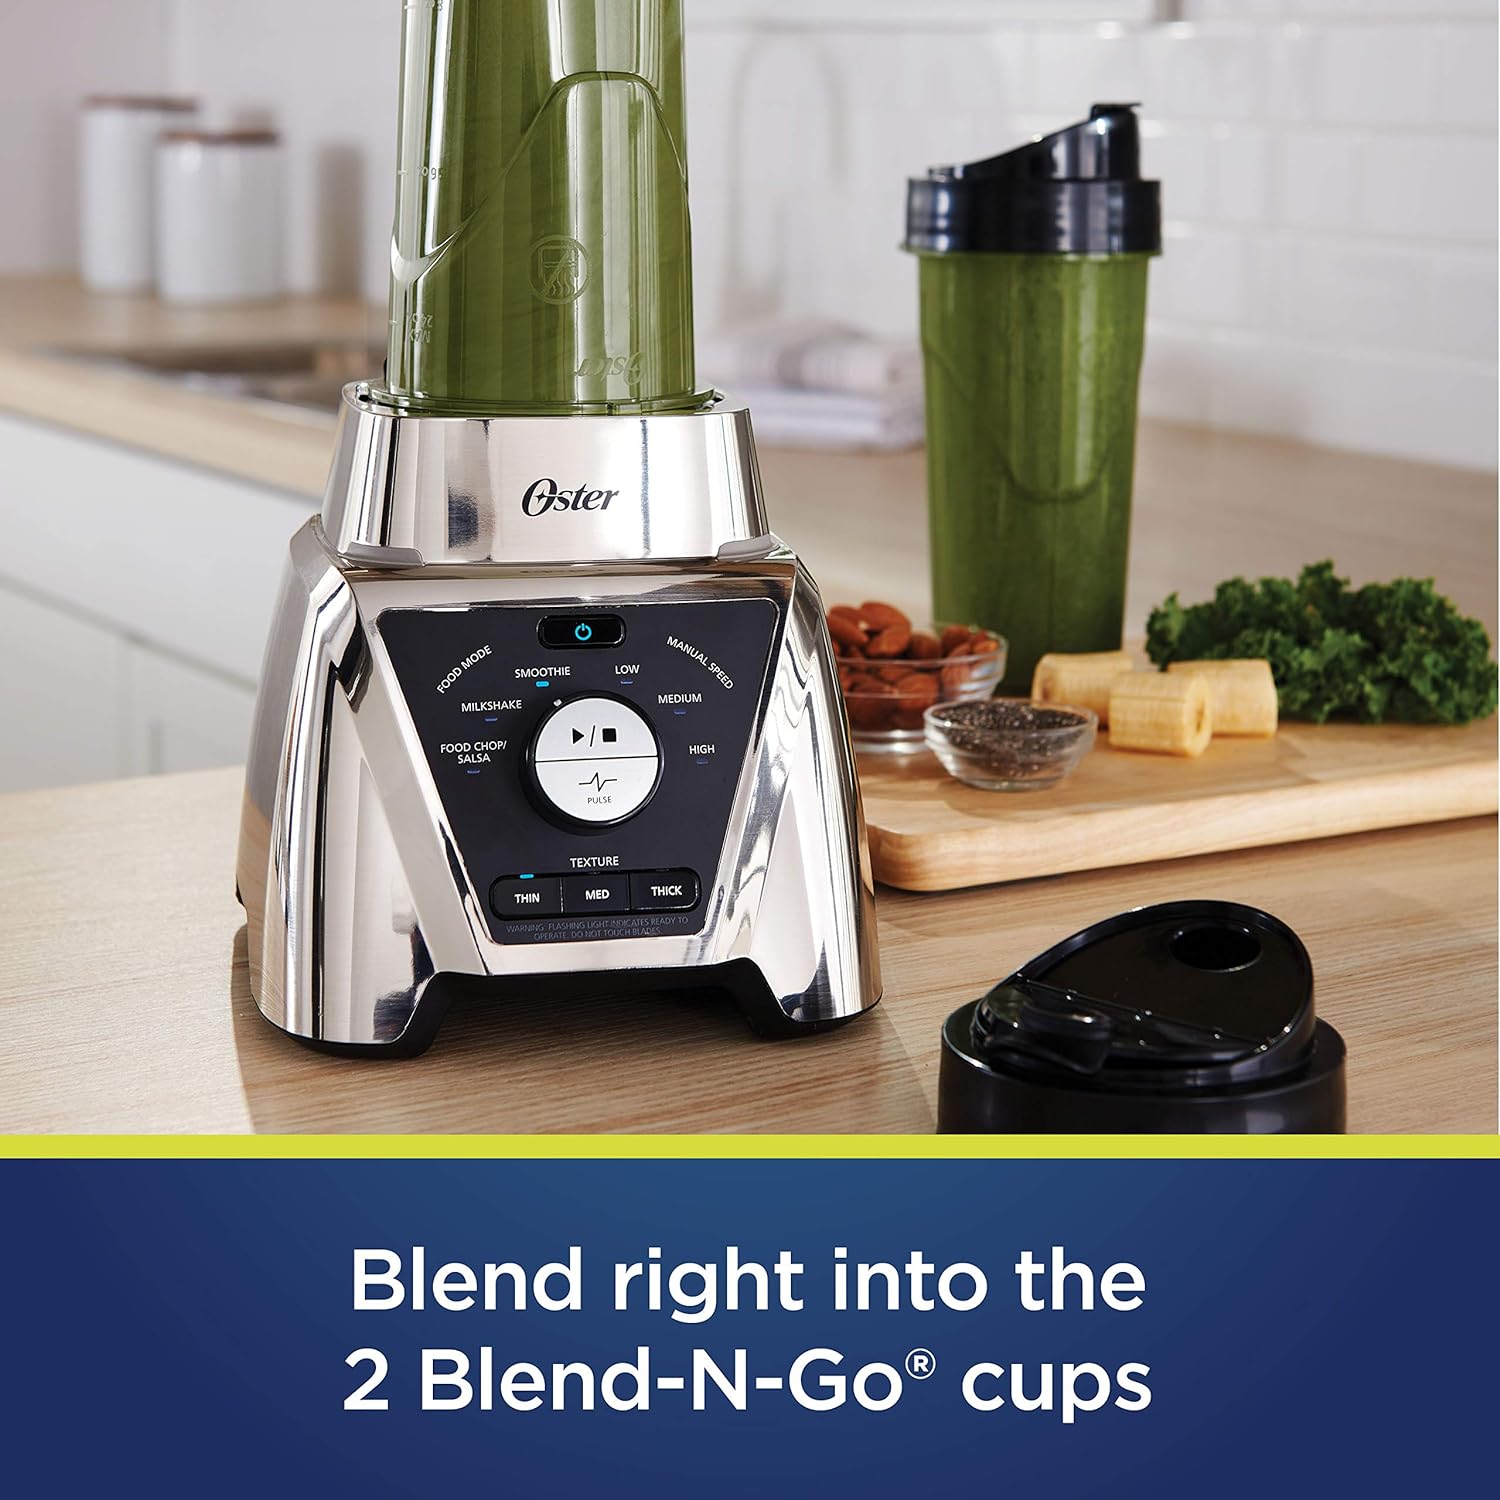 Oster BLSTTS-CB2-000 Pro Blender with Texture Select Settings, 2 Blend-N-Go Cups and Tritan Jar, 64 Ounces, Brushed Nickel…